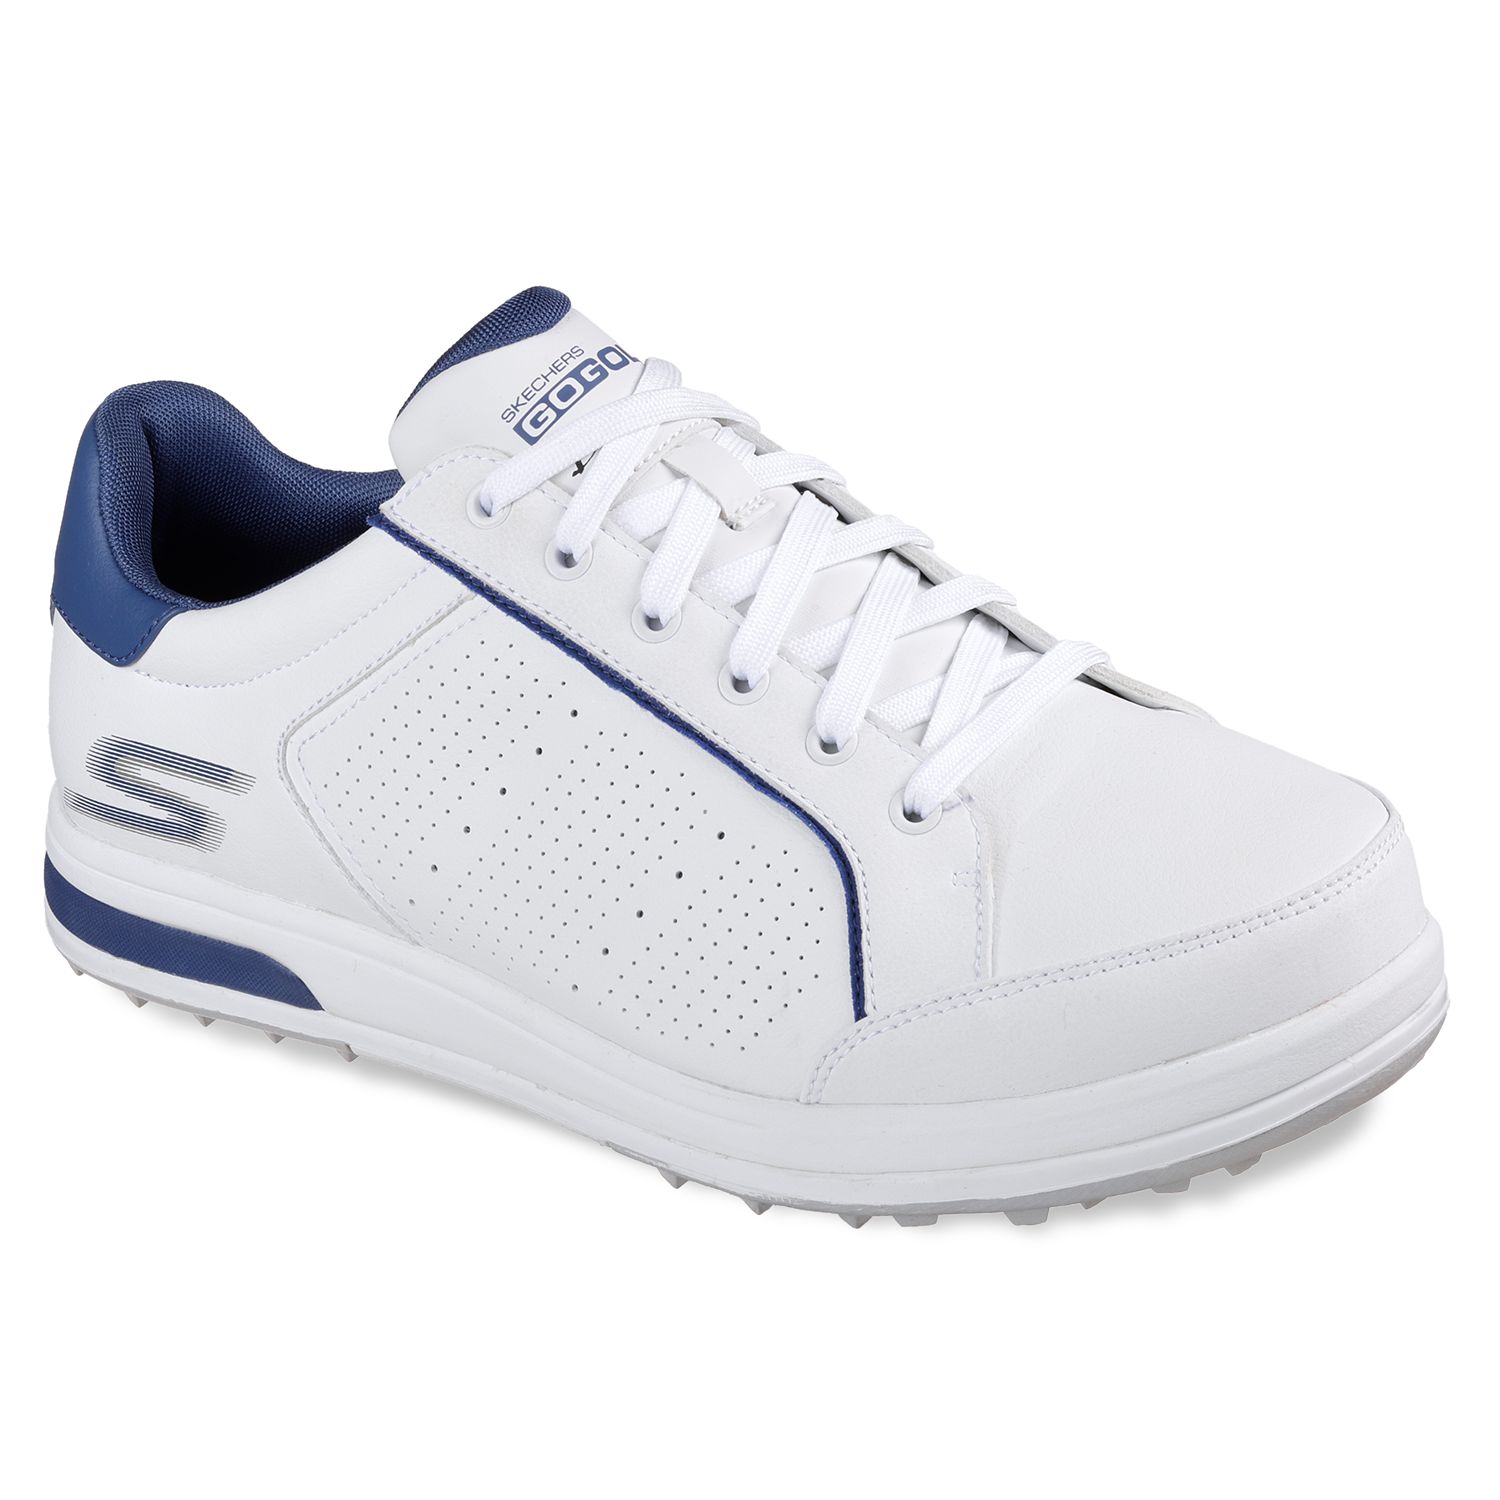 skechers golf shoes relaxed fit